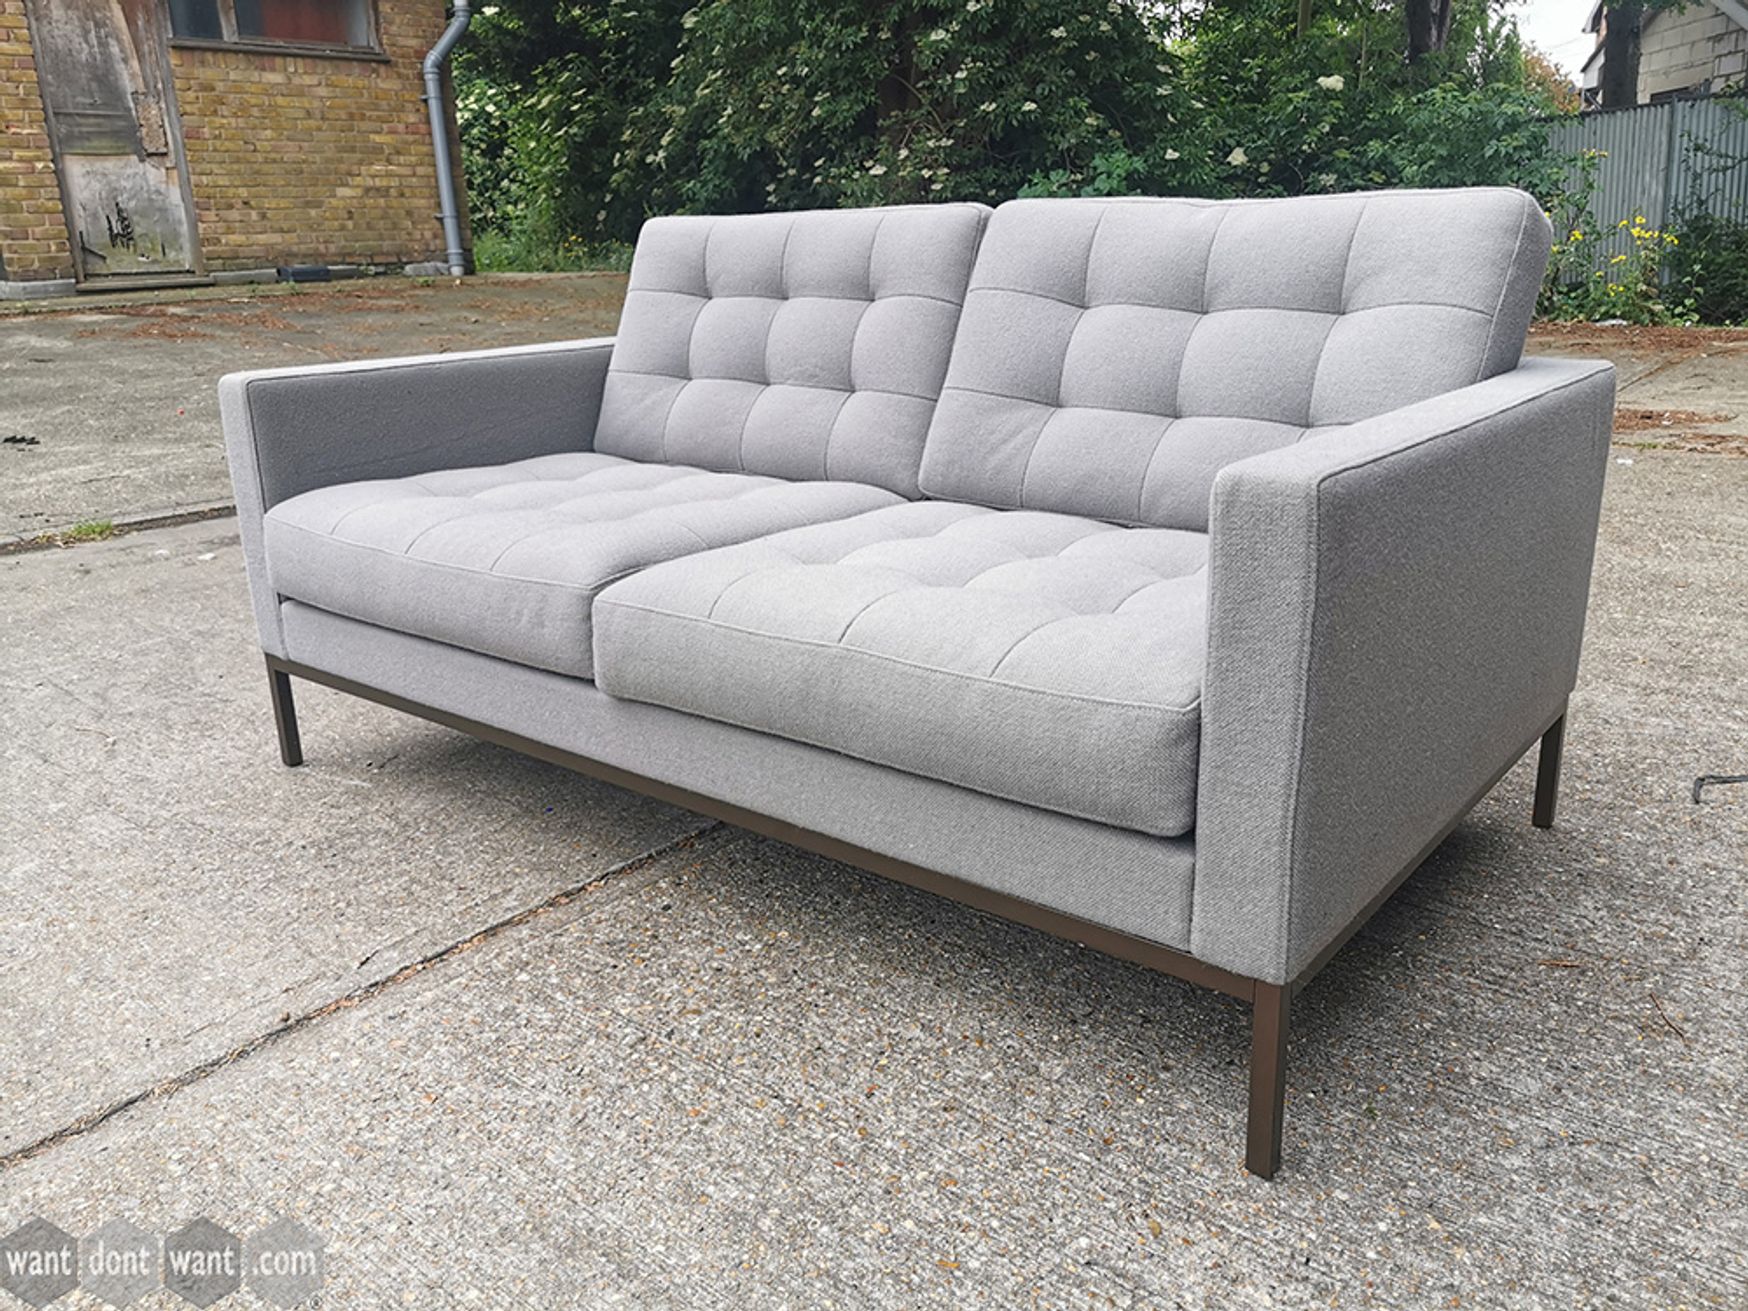 Used Florence Knoll 'Relax' 2 Seater Sofa in Light Grey